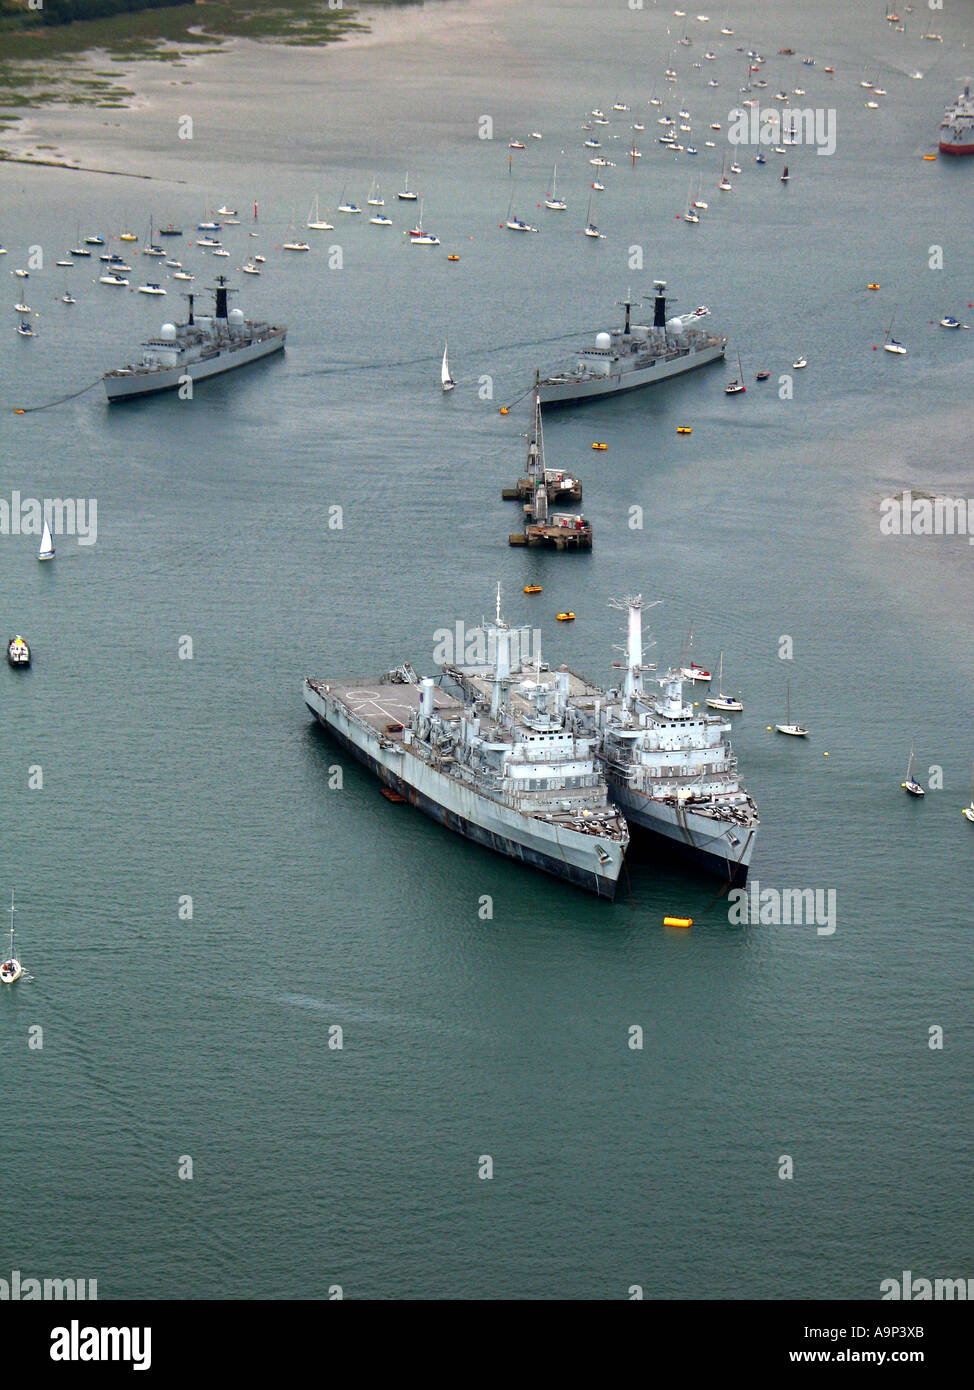 Royal Navy ships docked in portsmouth harbour, England. ifos 2005 Stock Photo